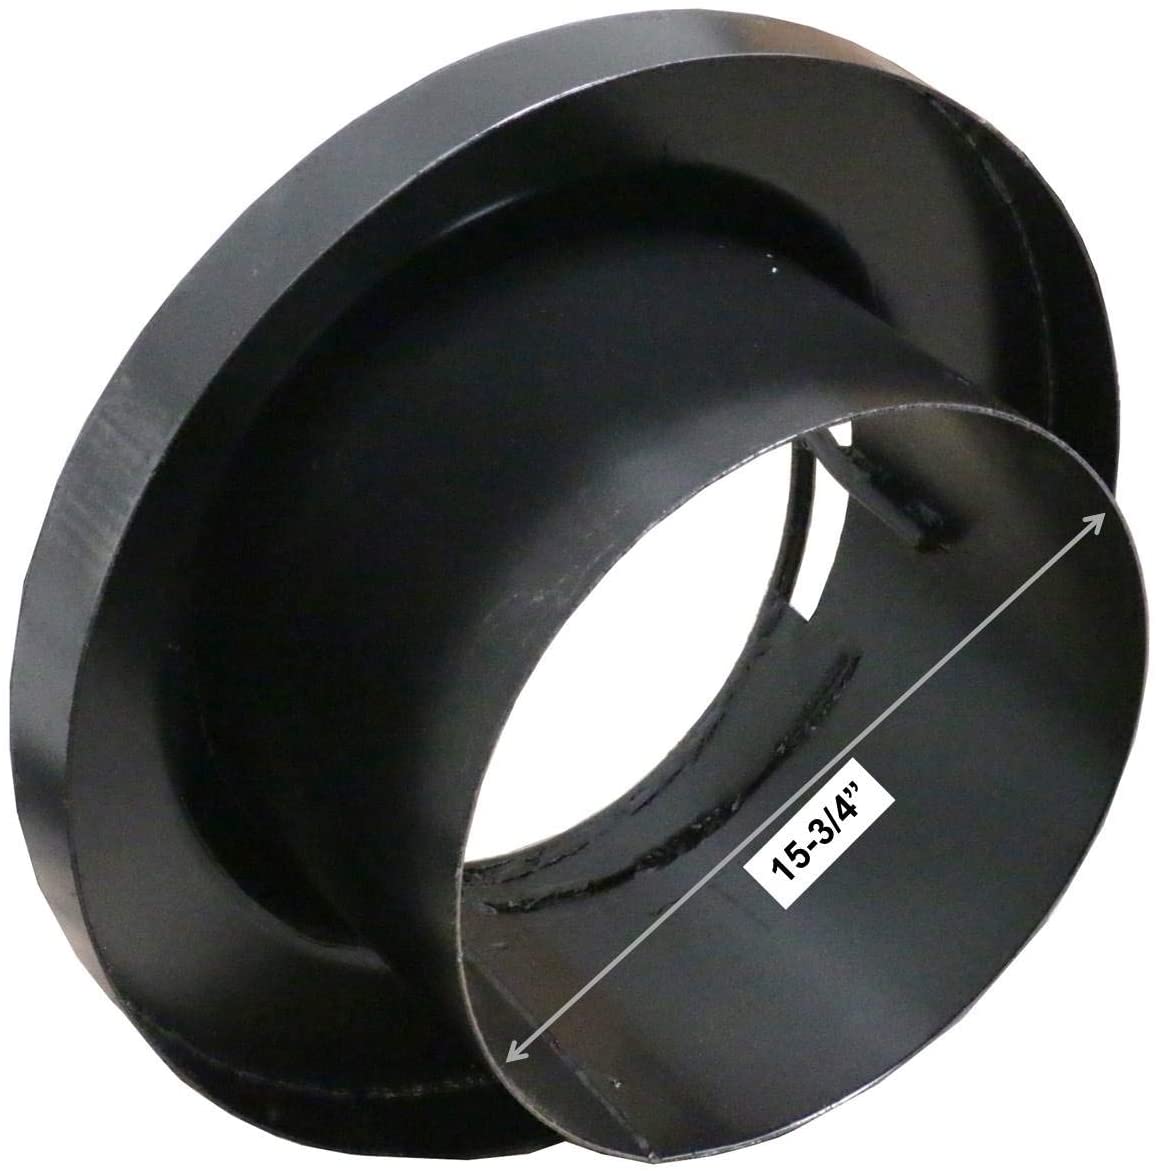 Leyso 14” Diameter 3 Opening Steel Rim to Replace the Worn Out Wok Ring for  Chinese Wok Range